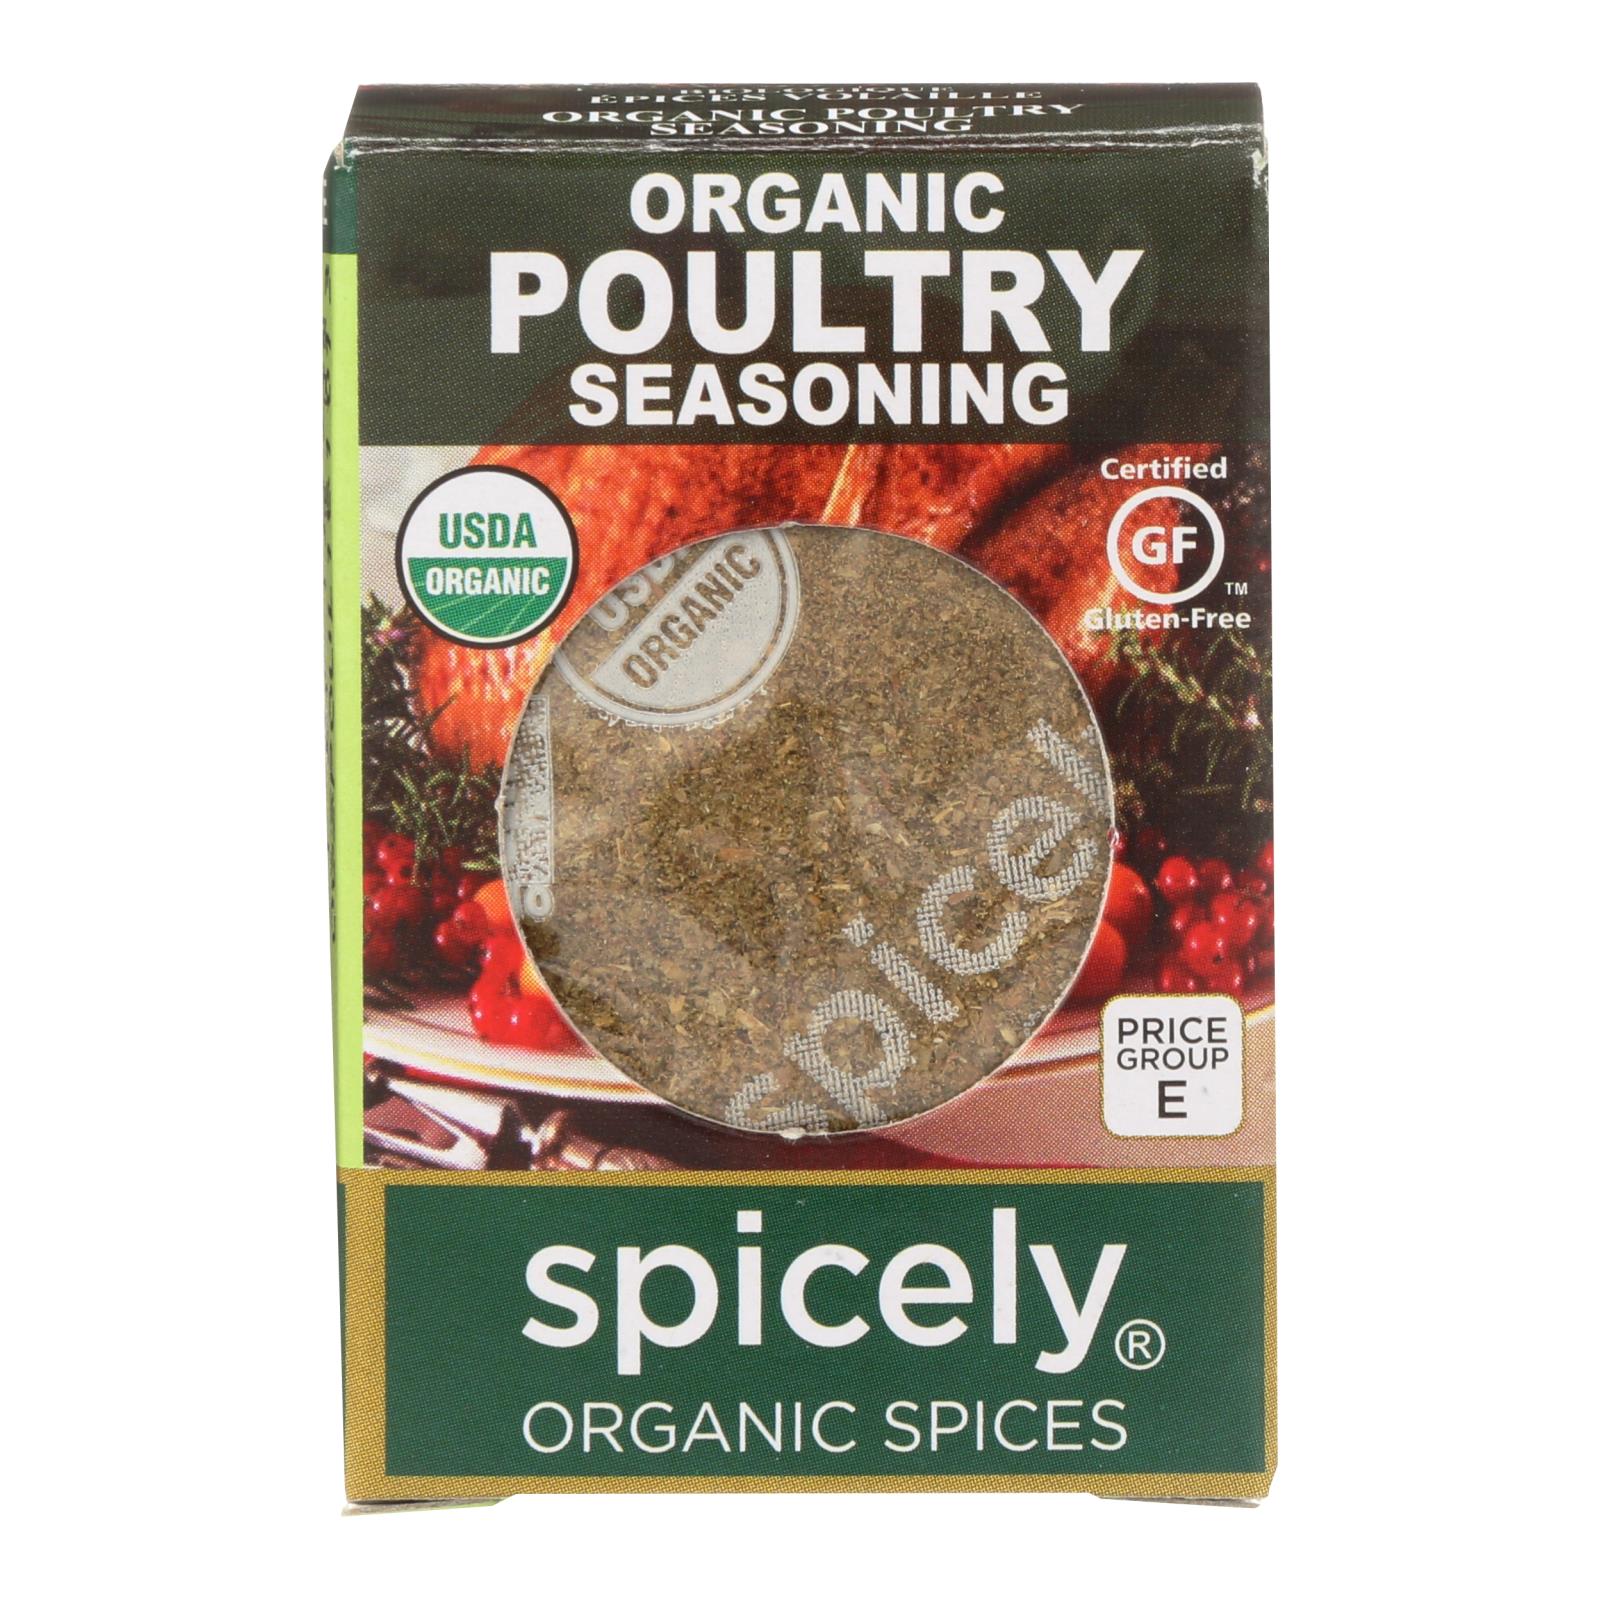 Spicely Organics - Organic Seasoning - Poultry - Case Of 6 - 0.35 Oz. - Whole Green Foods